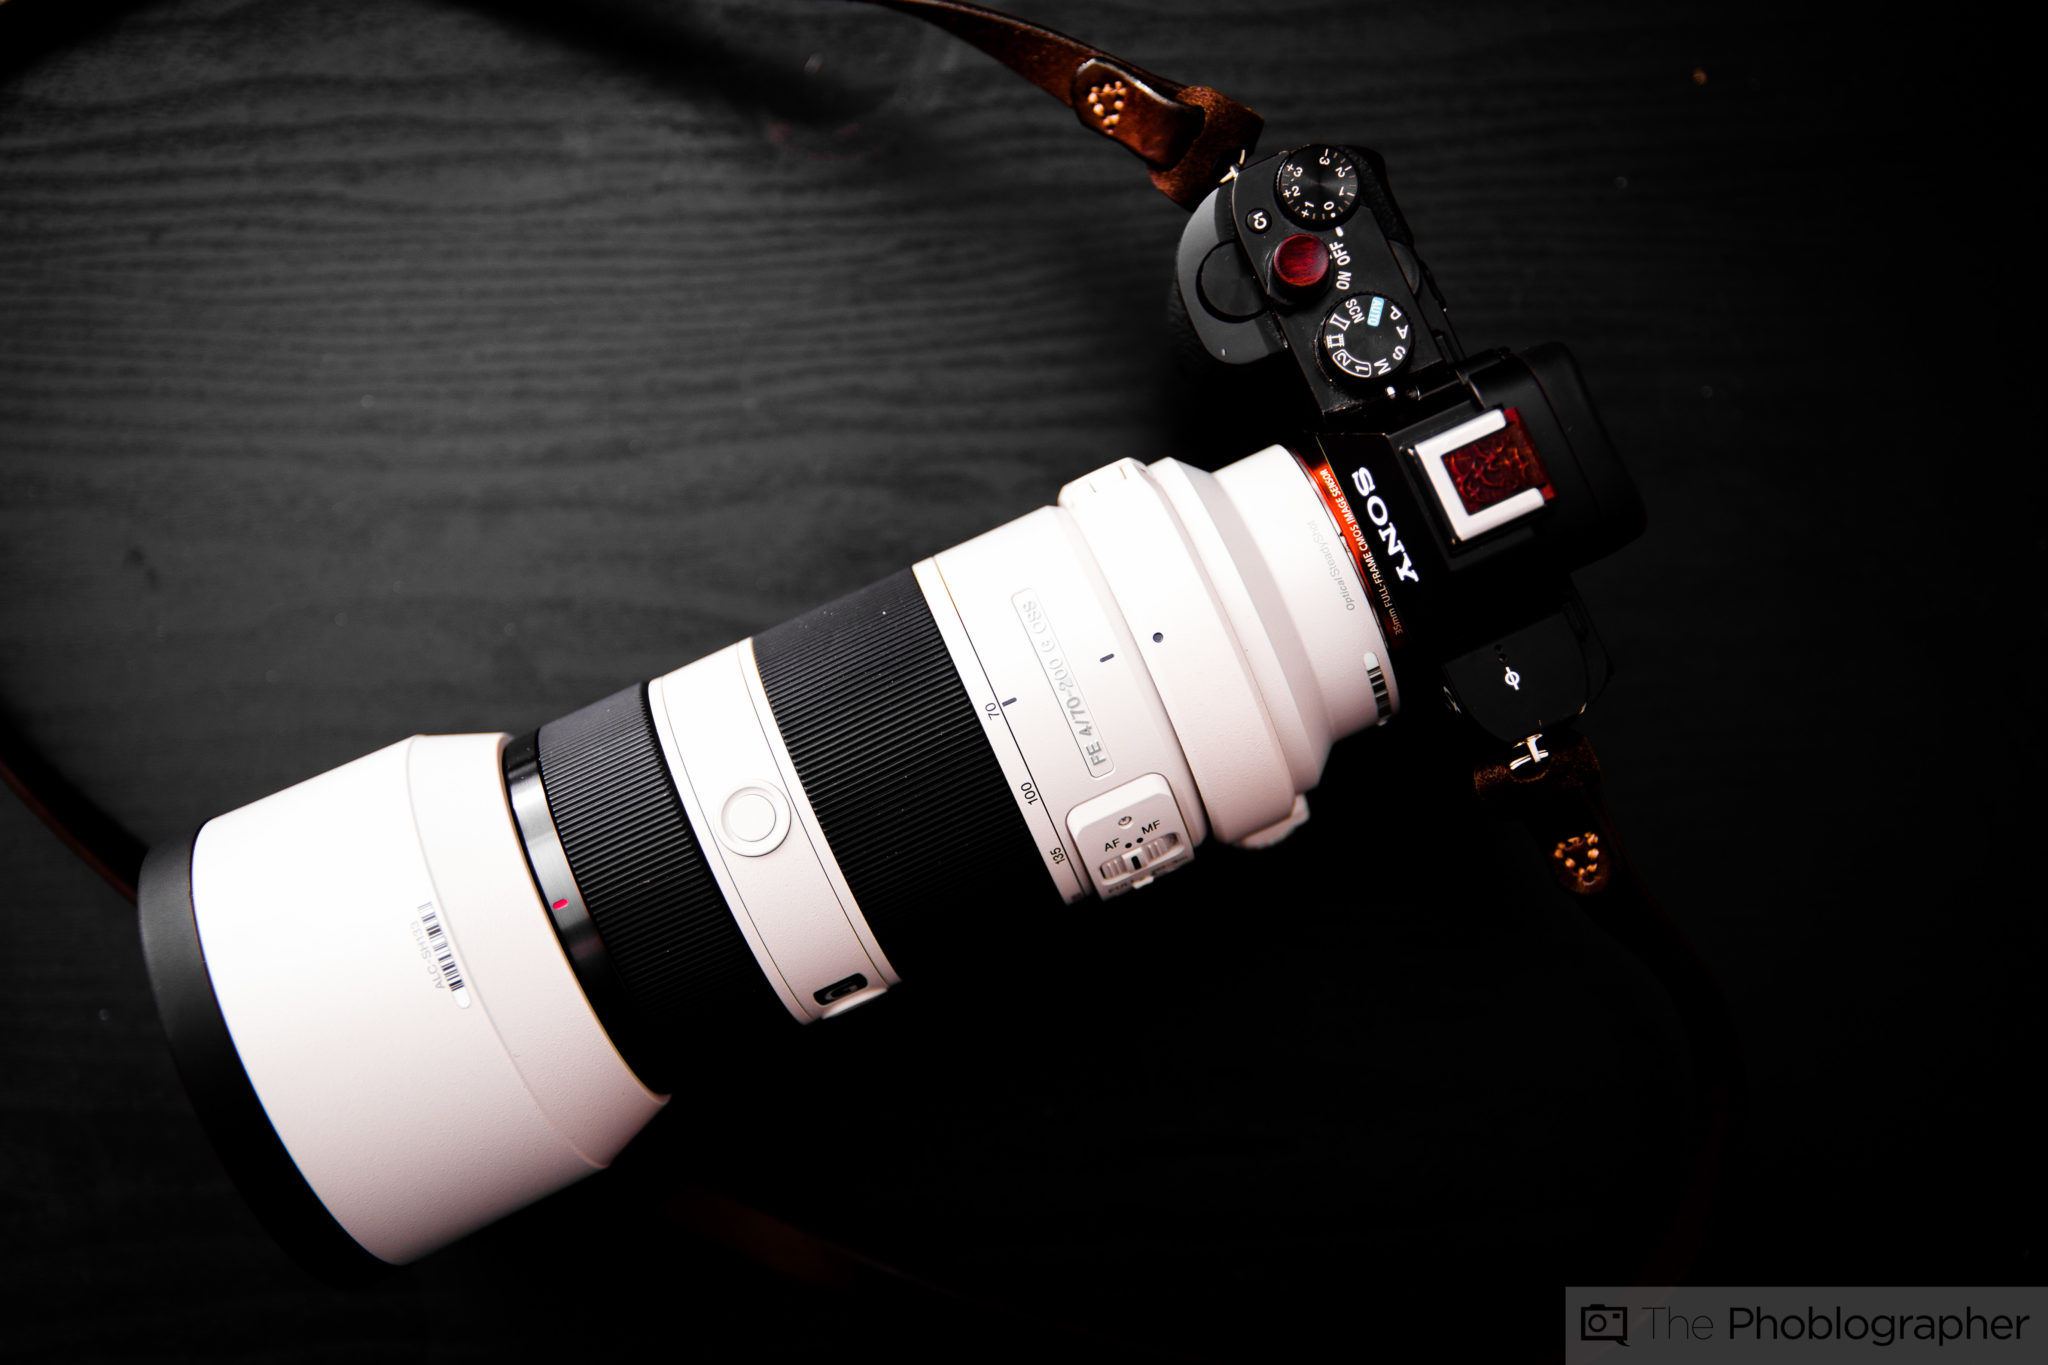 Chris Gampat The Phoblographer Sony 70-200mm f4 OSS review product images (3 of 10)ISO 4001-180 sec at f - 2.8